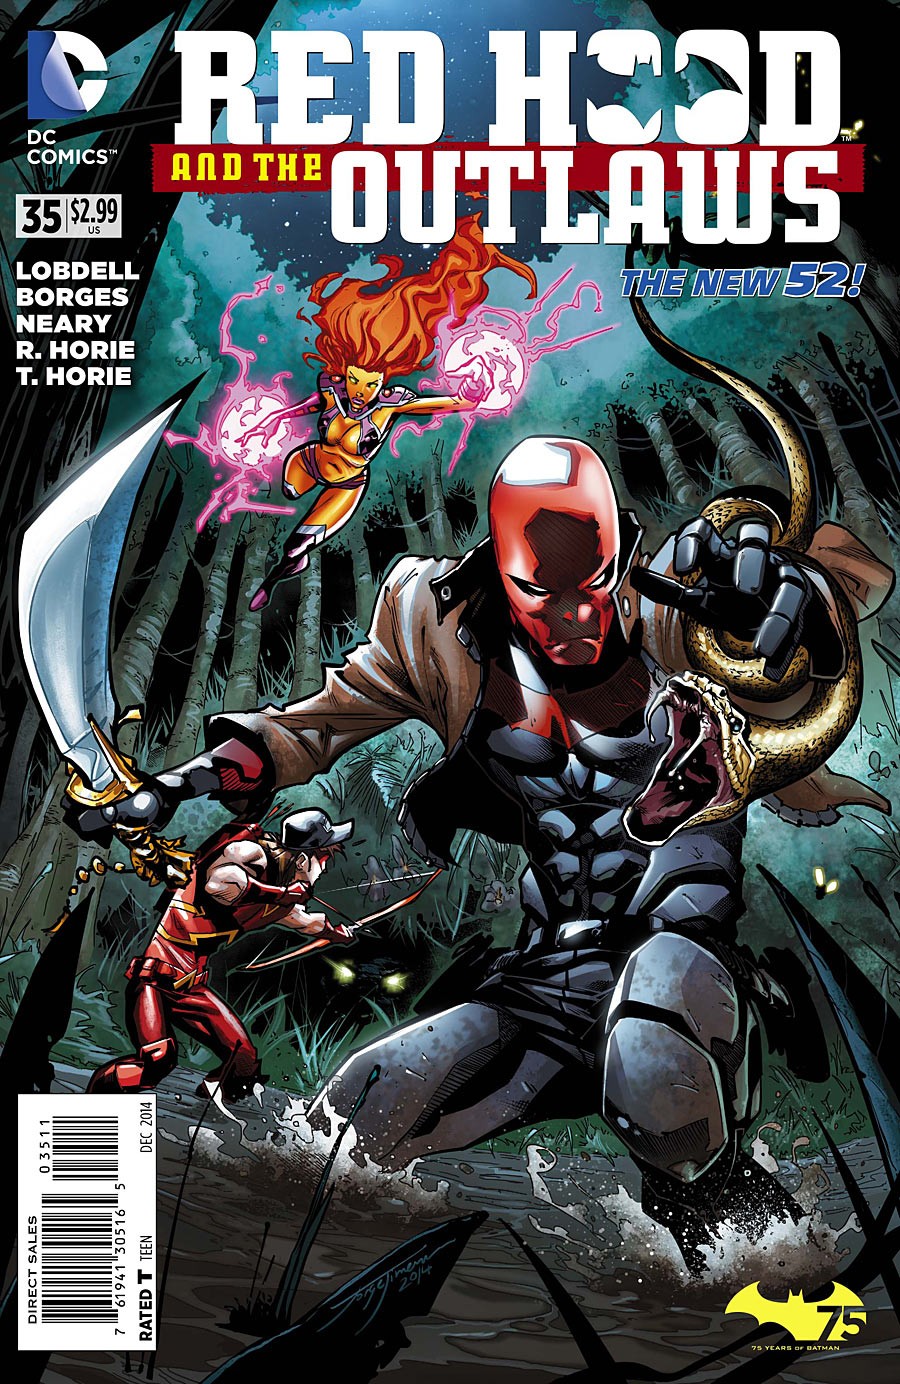 Red Hood and the Outlaws Vol. 1 #35